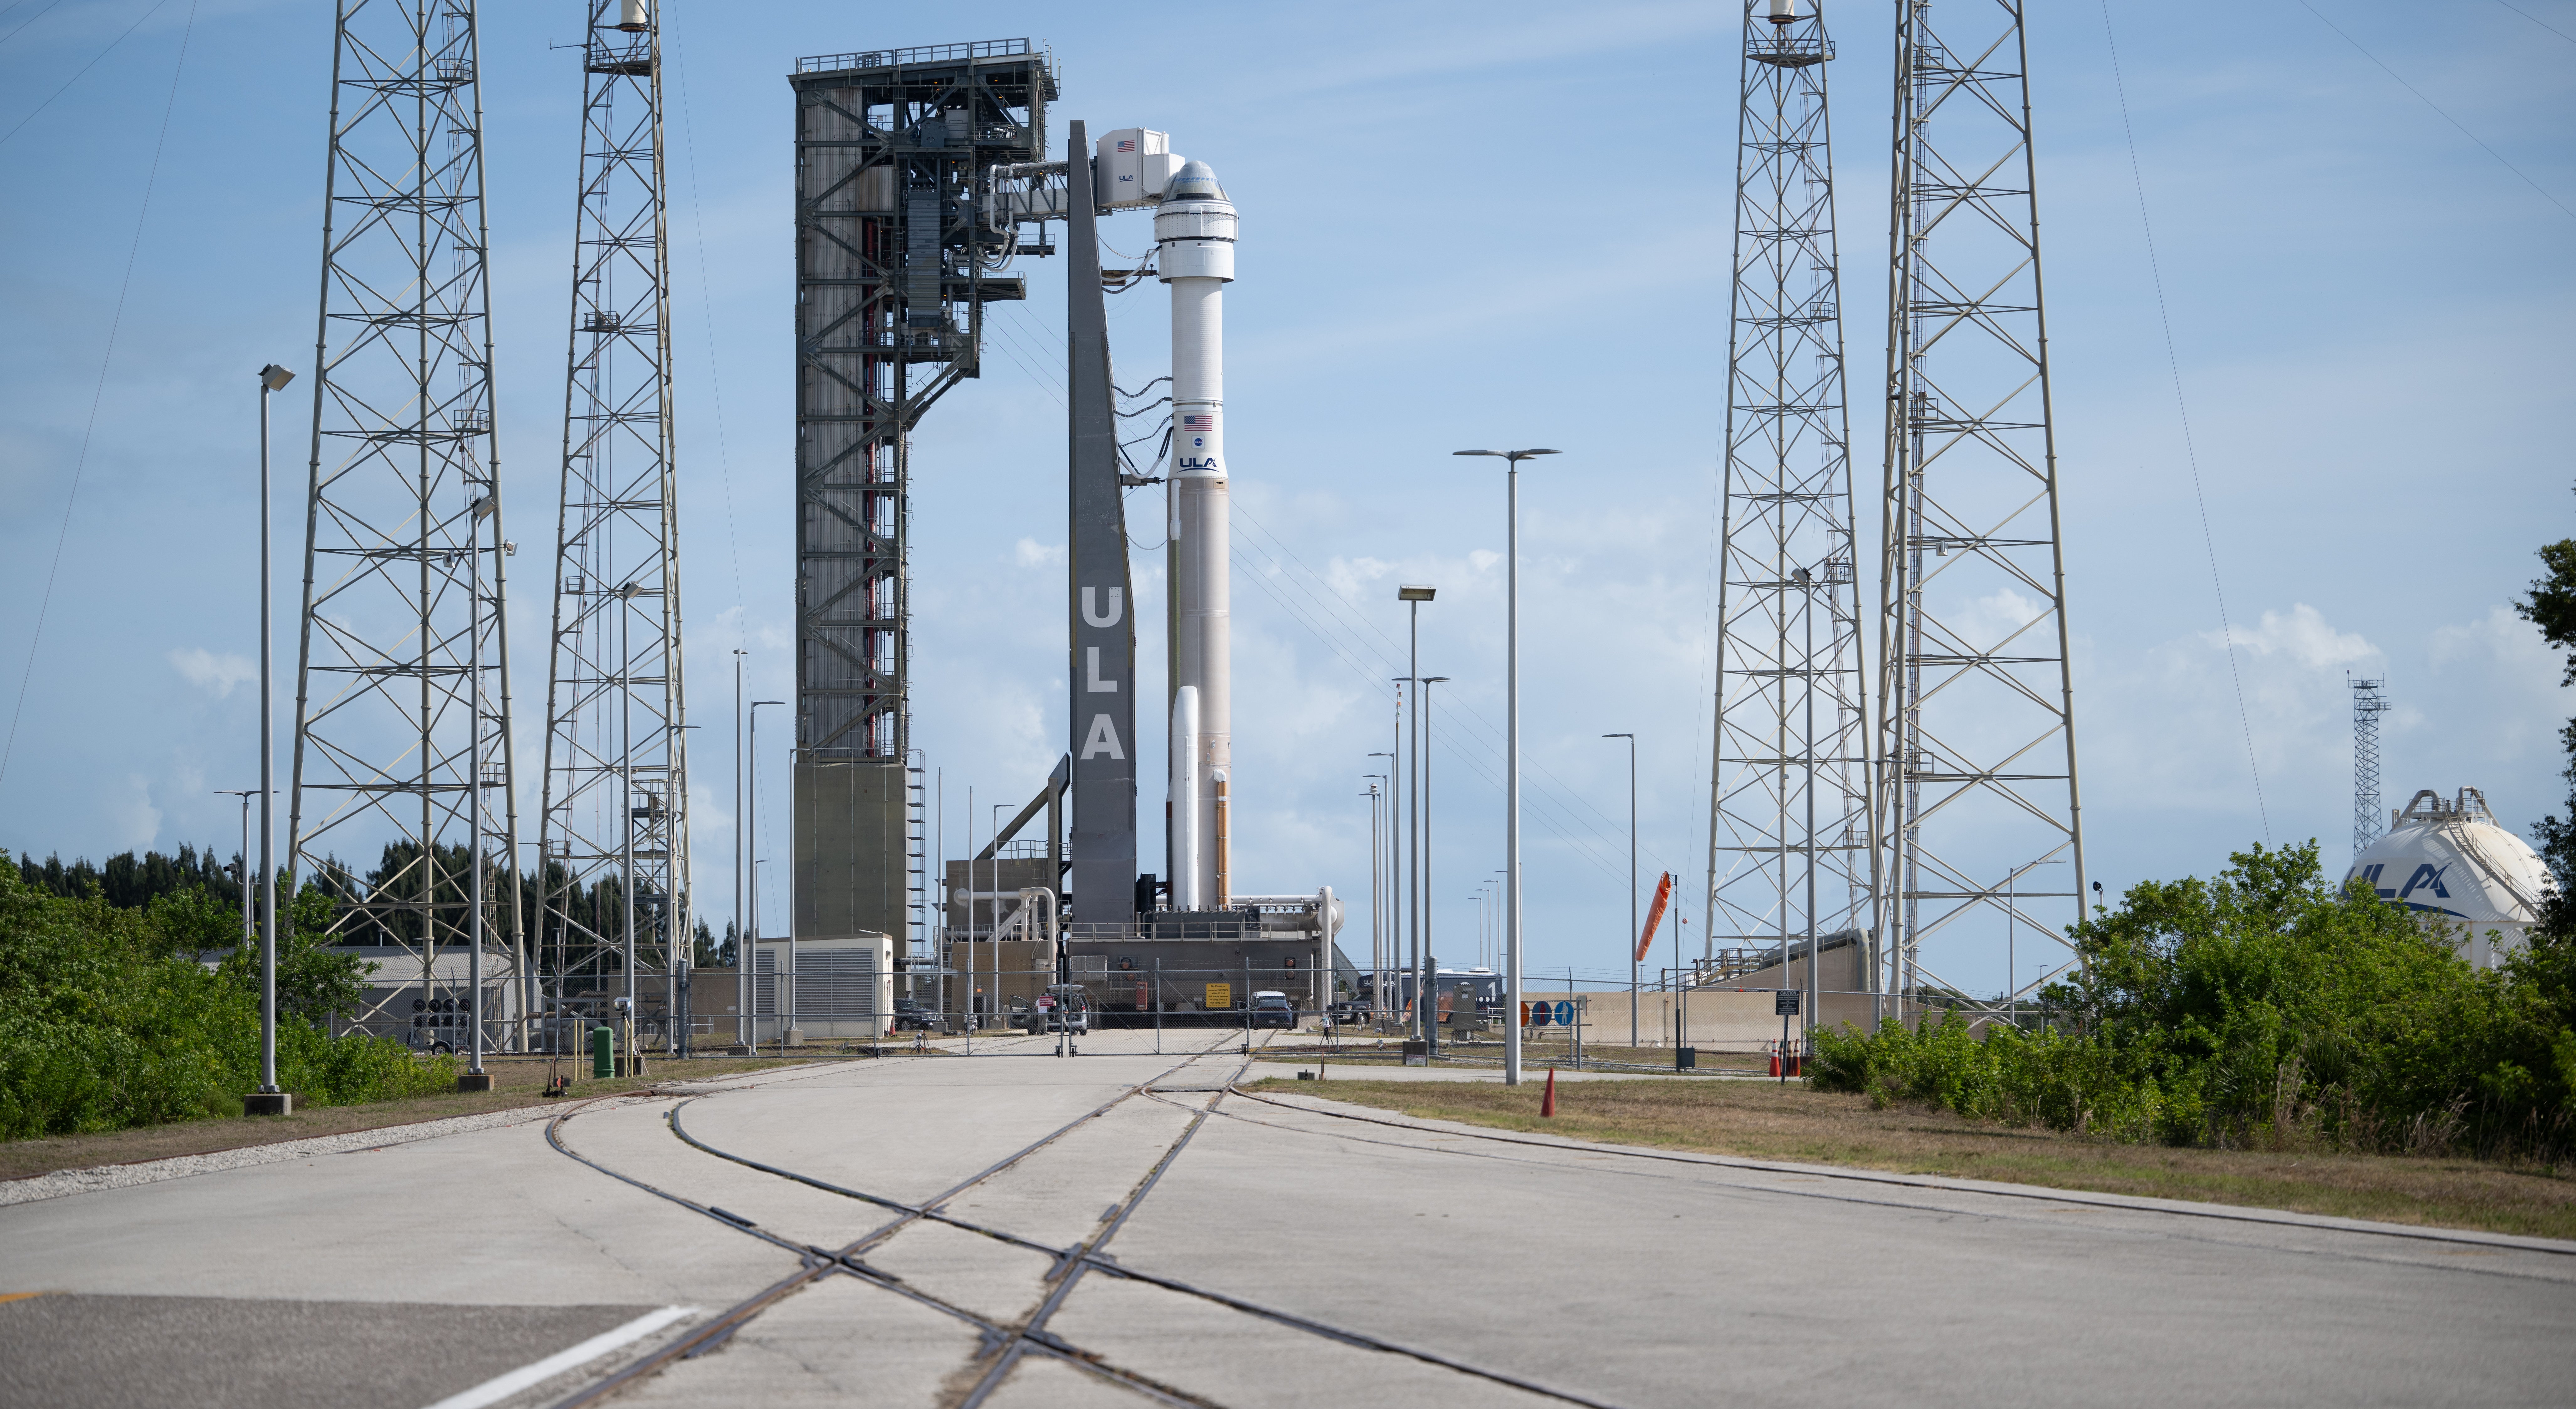 A United Launch Alliance Atlas V rocket with Boeing's CST-100 Starliner spacecraft aboard is seen on the launch pad at Space Launch Complex 41 ahead of the NASA’s Boeing Crew Flight Test, Monday, May 6, 2024 at Cape Canaveral Space Force Station in Florida.